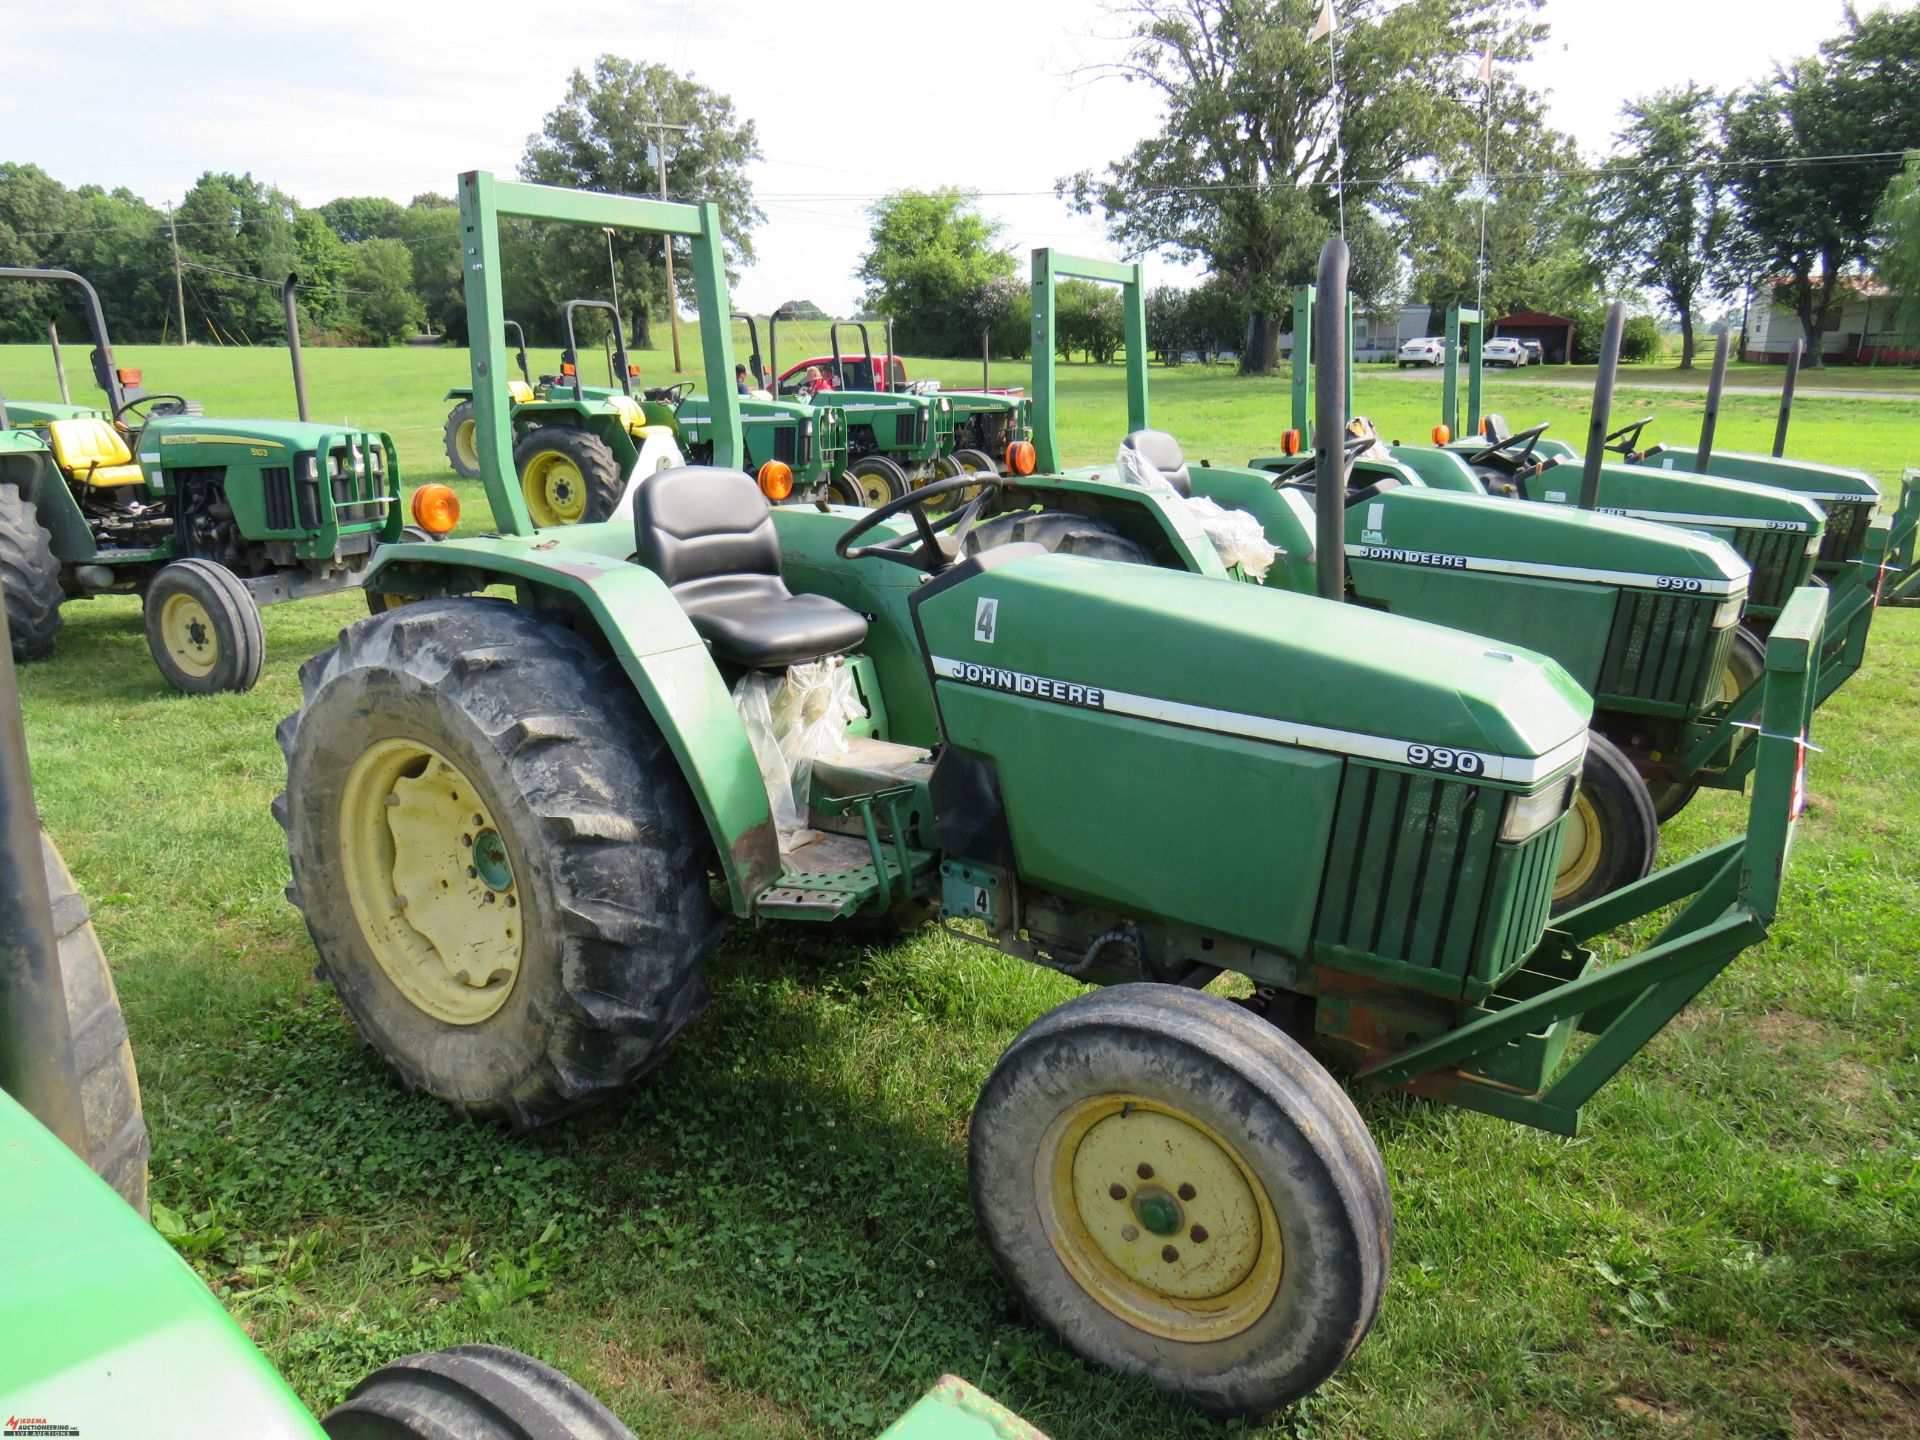 2001 JOHN DEERE 990 TRACTOR, PTO, NO 3PT ARMS, 14.9-24 TIRES, 5555 HOURS SHOWING (HOURS SUBJECT TO - Image 2 of 8